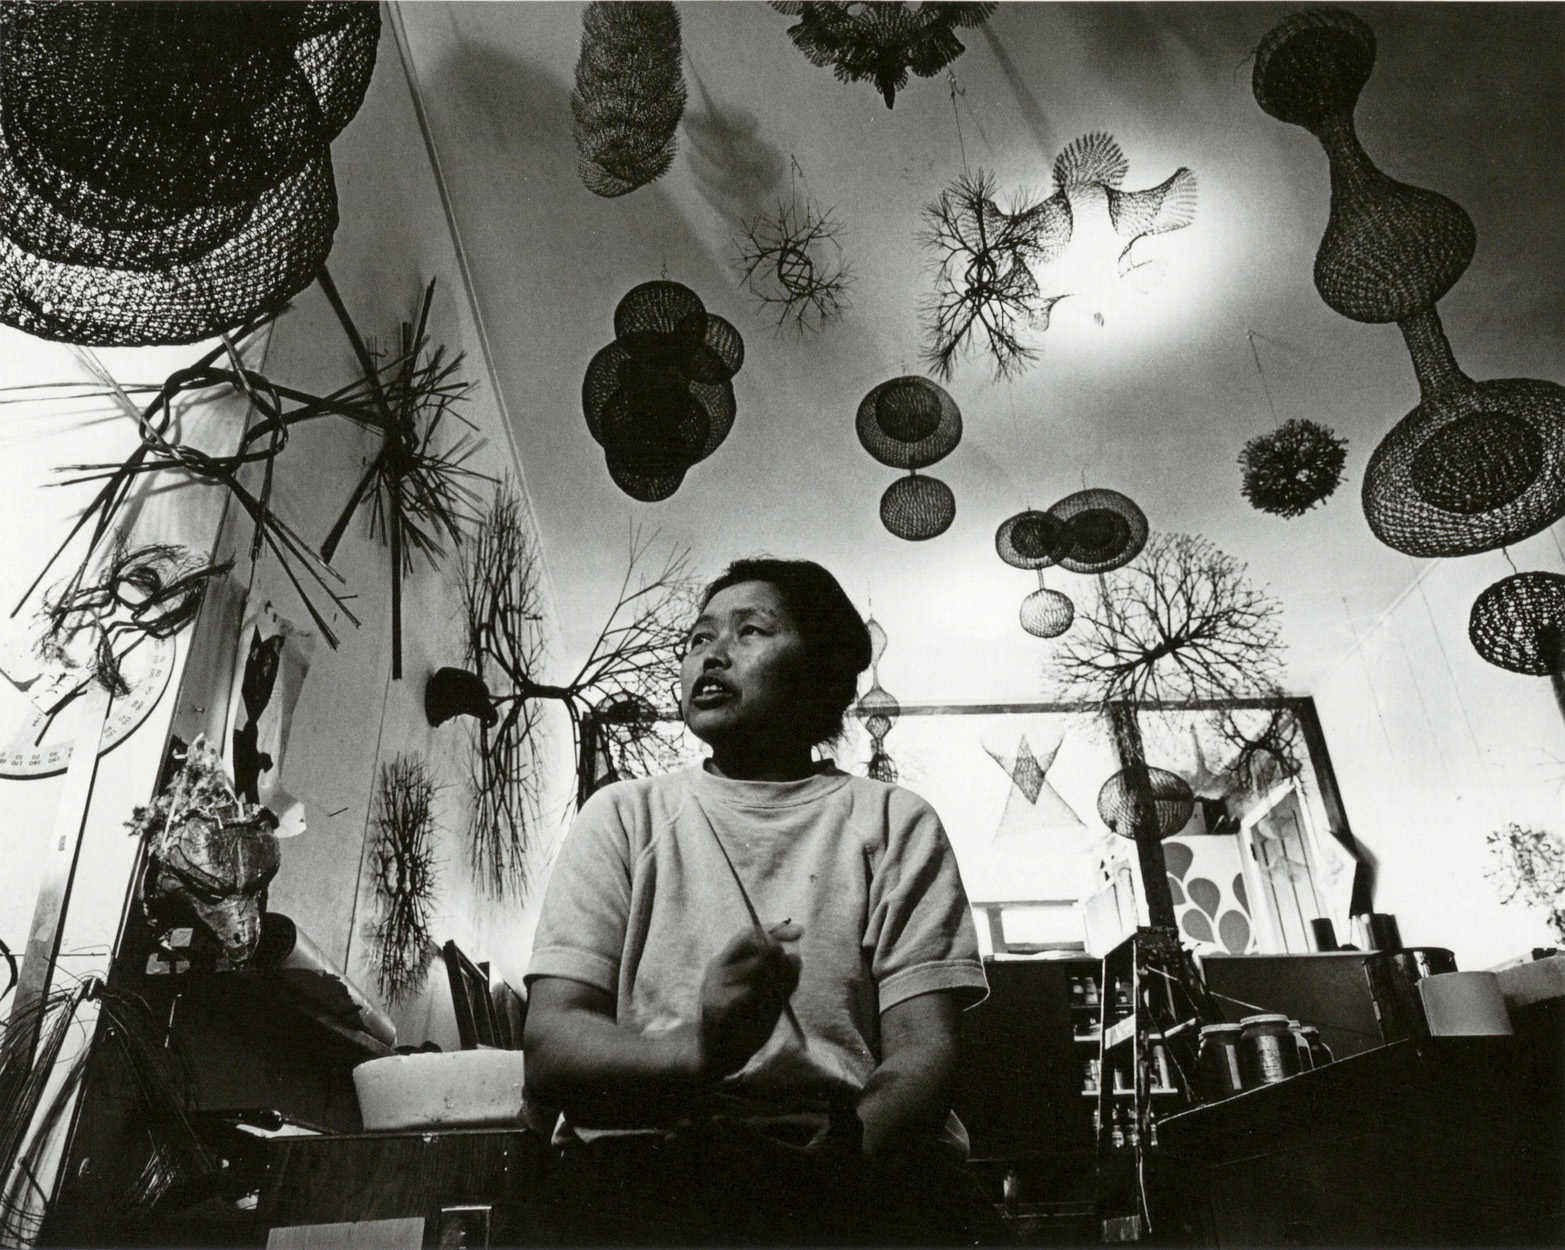 Ruth in her studio, CA. 1970. Photograph by Rondal Partridge. © 1970, 2014 Imogen Cunningham Trust.